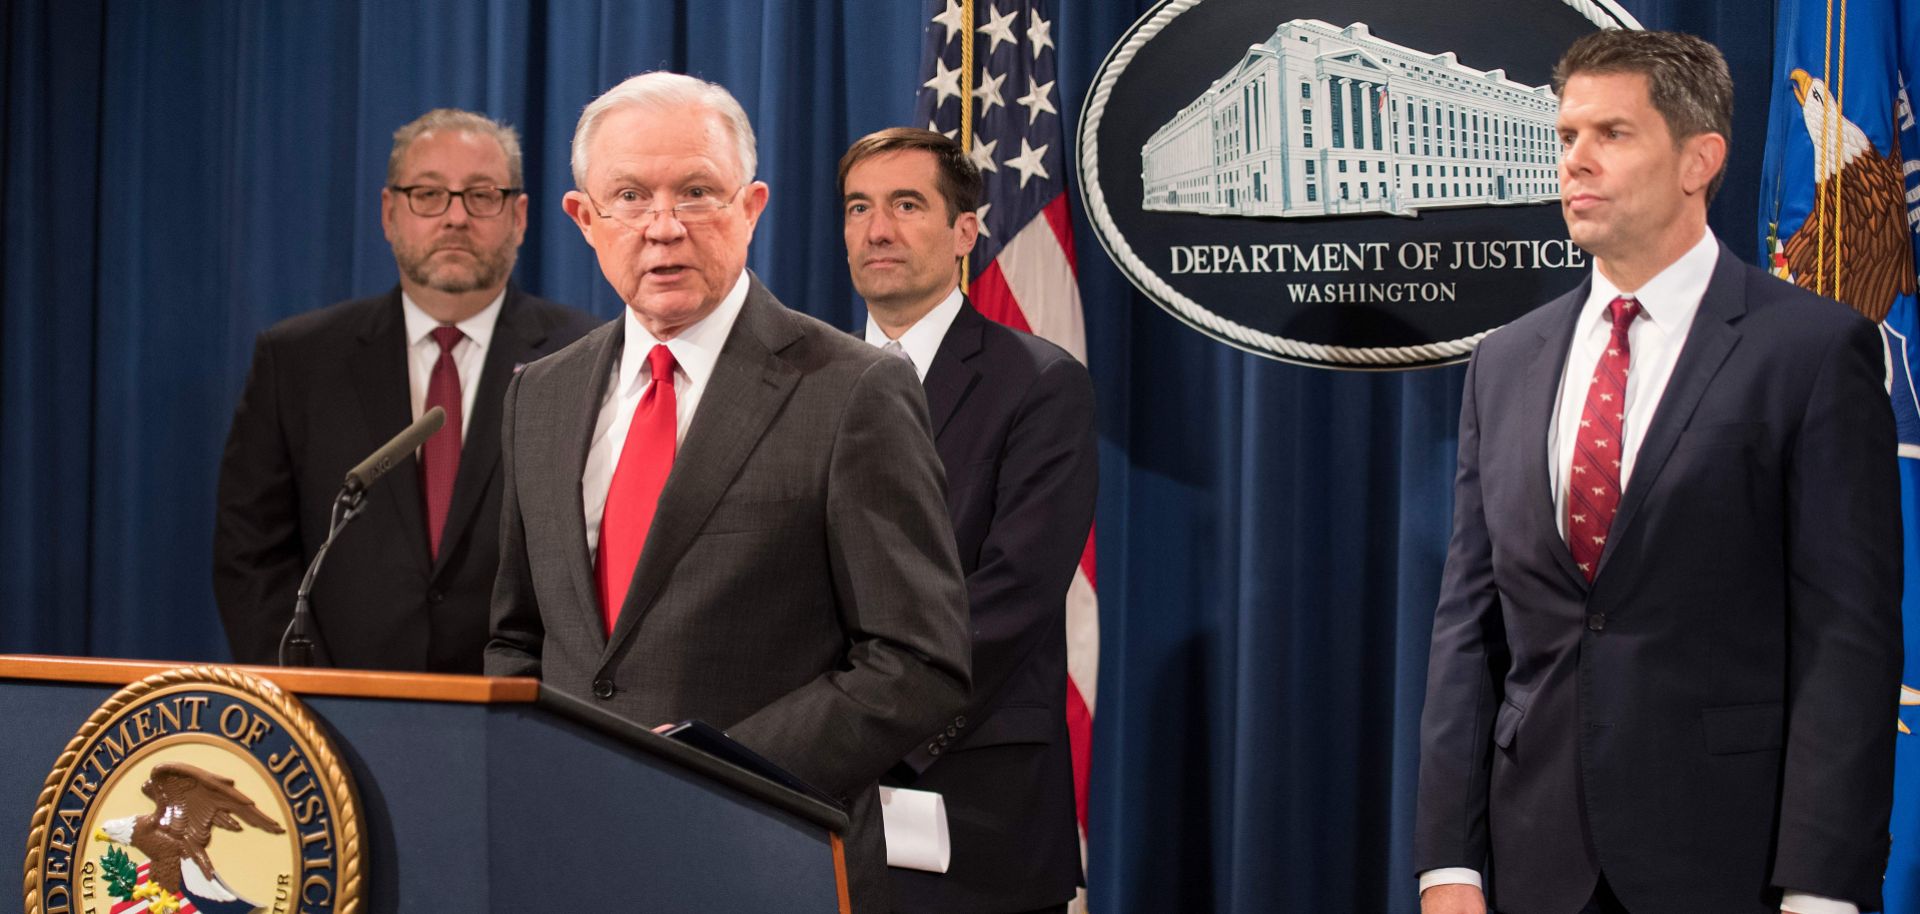 Former U.S. Attorney General Jeff Sessions announces the creation of a new initiative to crack down on Chinese intelligence officials stealing intellectual property from U.S. corporations through hacking and espionage during a press conference at the Justice Department on Nov. 1, 2018.